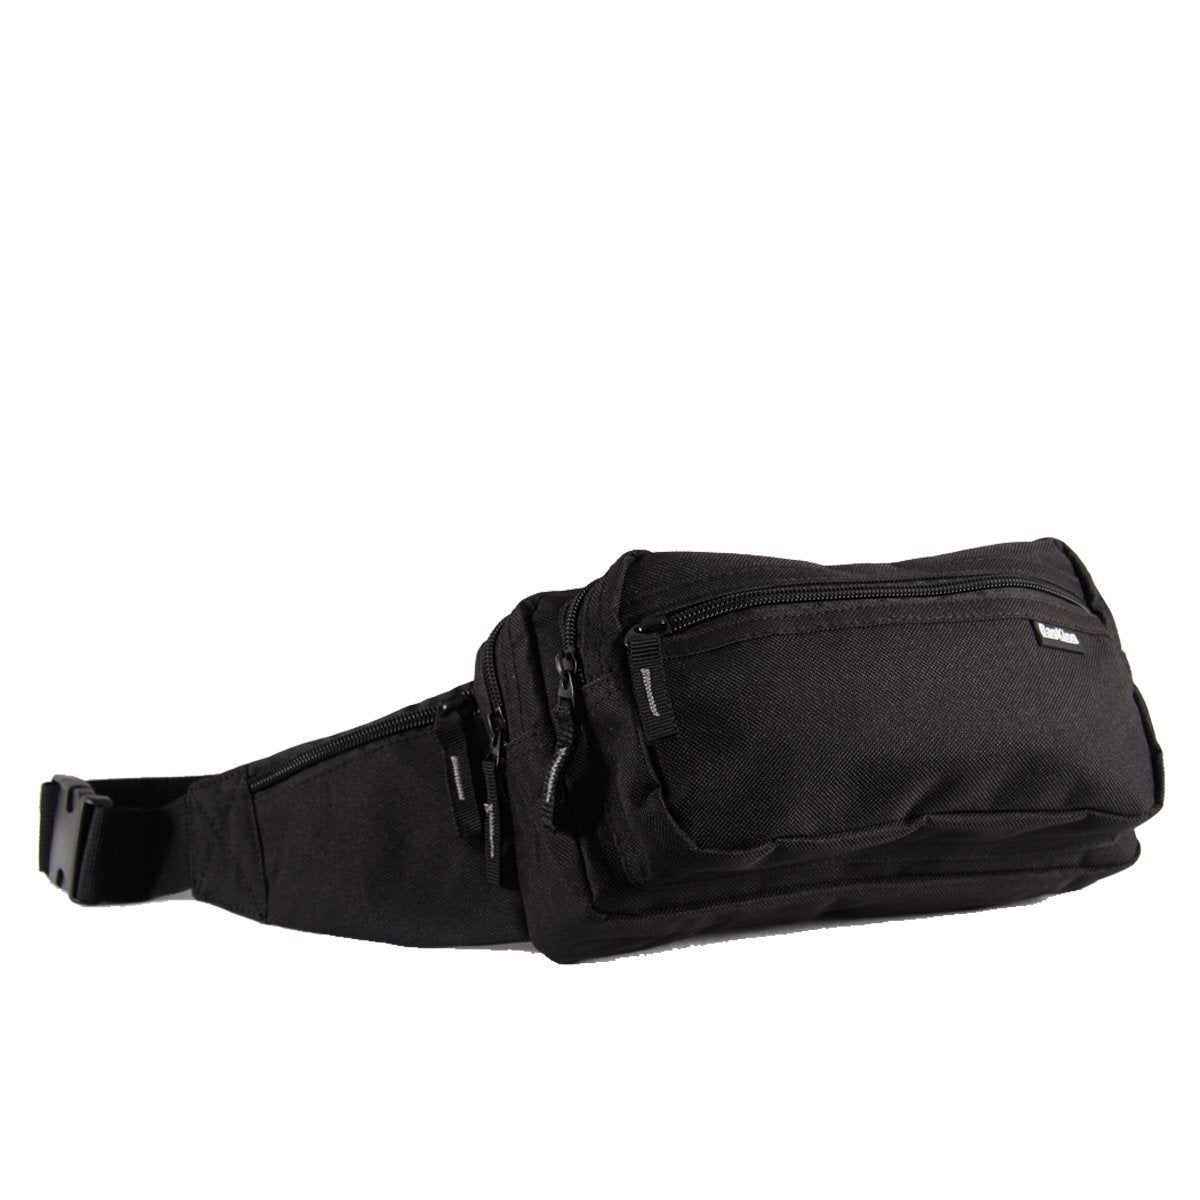 Bag King Accessories Bag King Western Fanny Pack